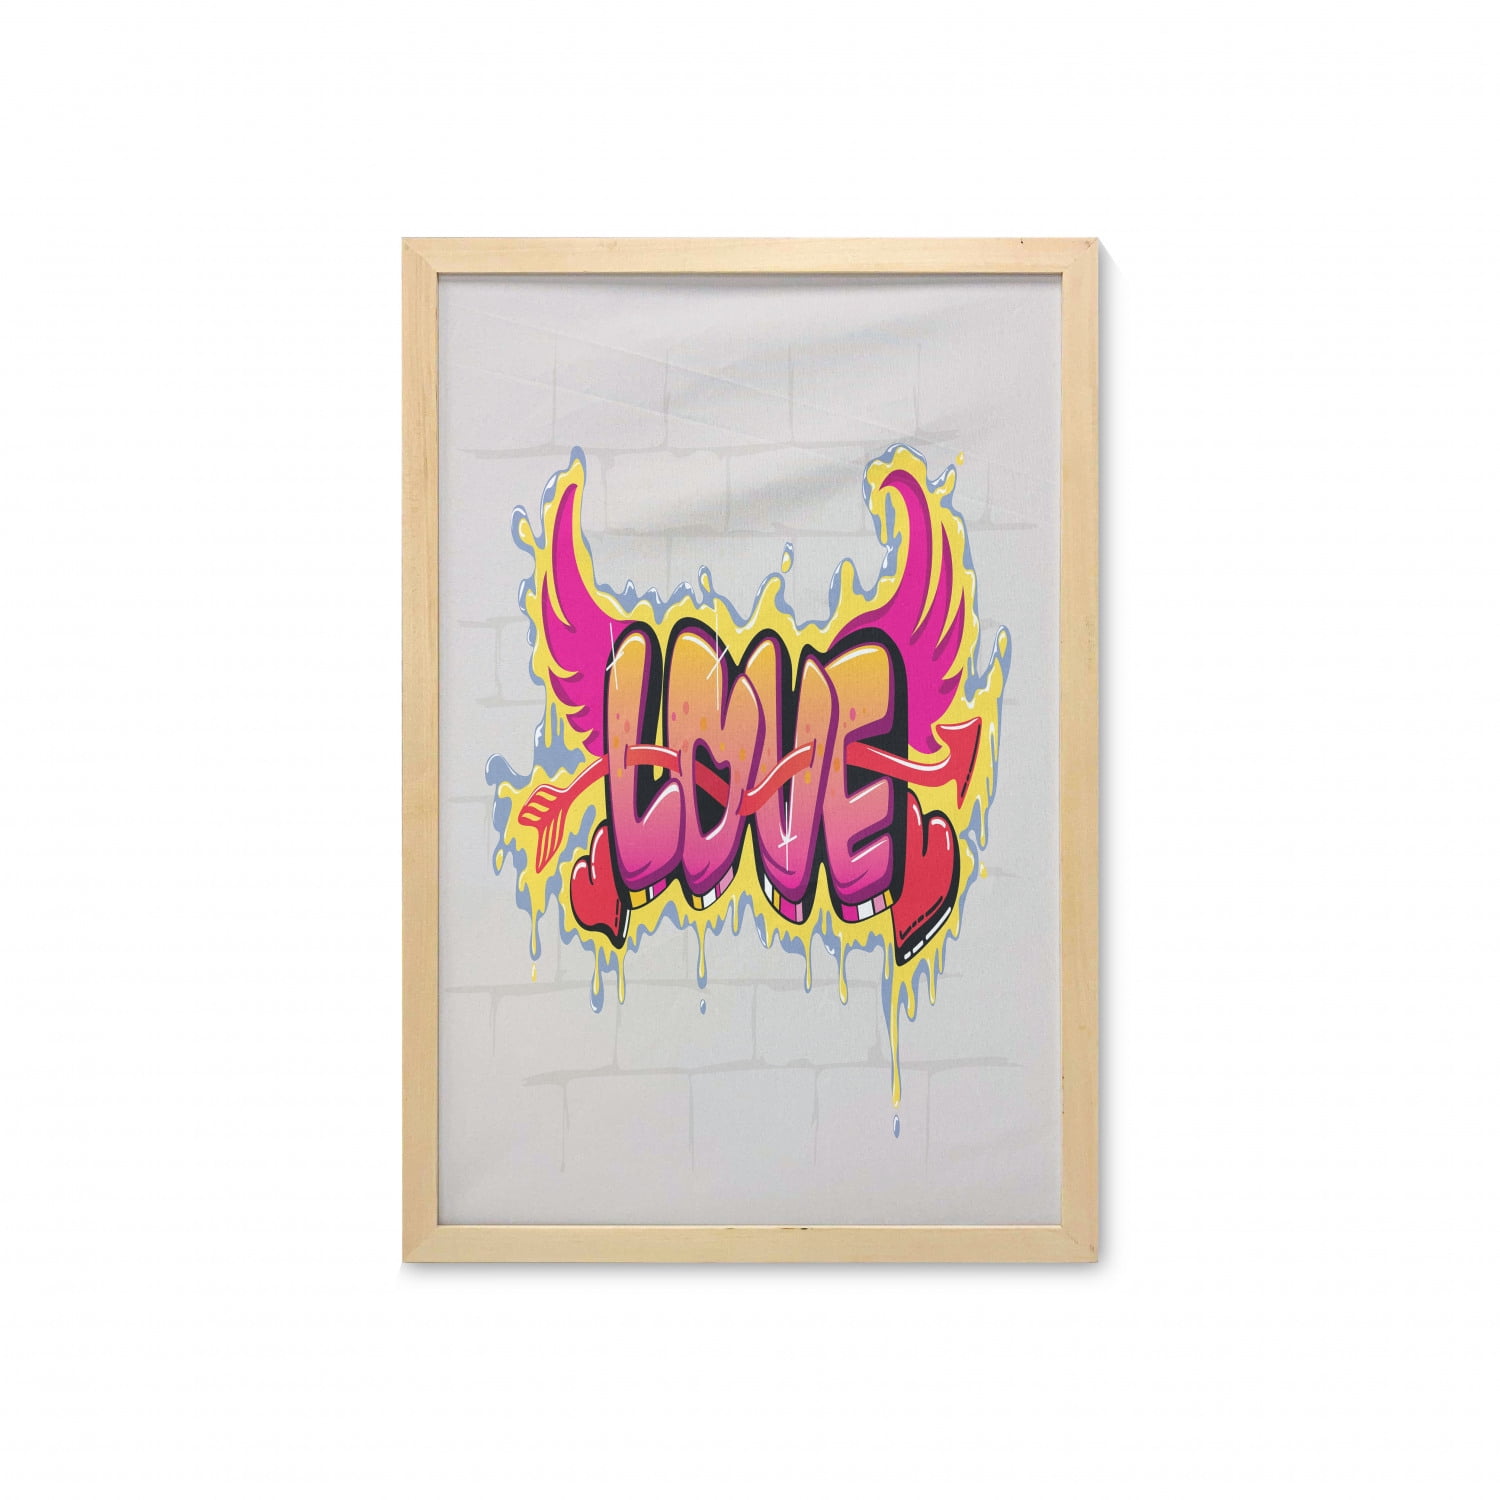 Urban Graffiti Wall Art With Frame Arrow Pierced Love Word As Bubble Letters With Wings On Drippy Painting Printed Fabric Poster For Bathroom Living Room Dorms 23 X 35 Multicolor By Ambesonne